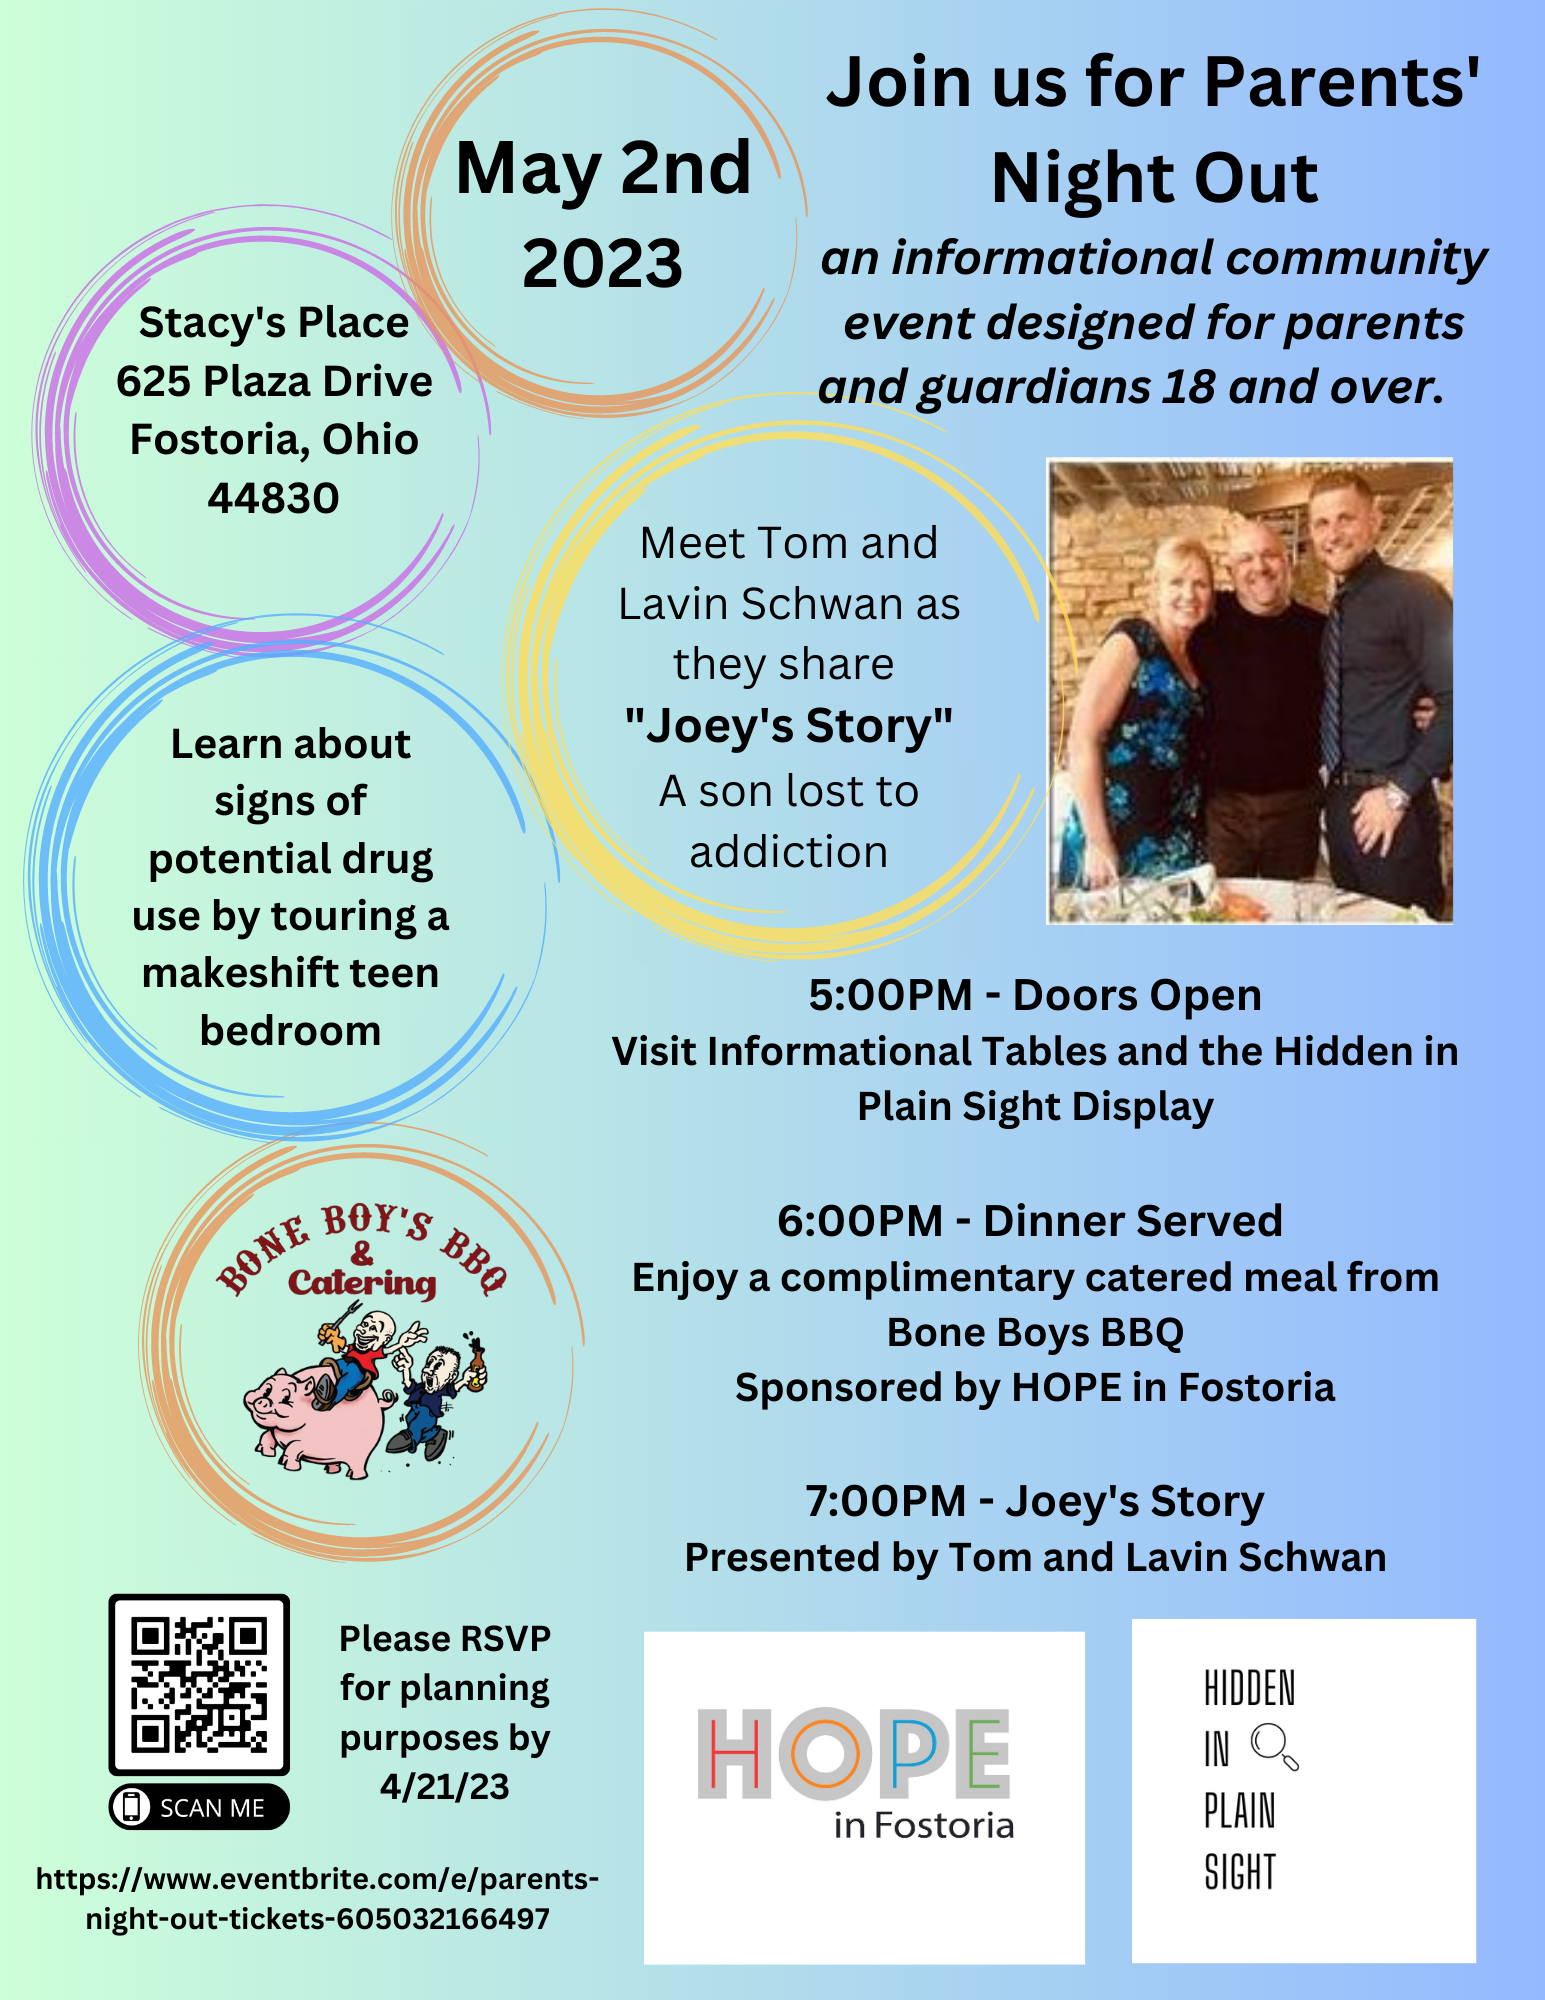 HOPE in Fostoria: Parents' Night Out